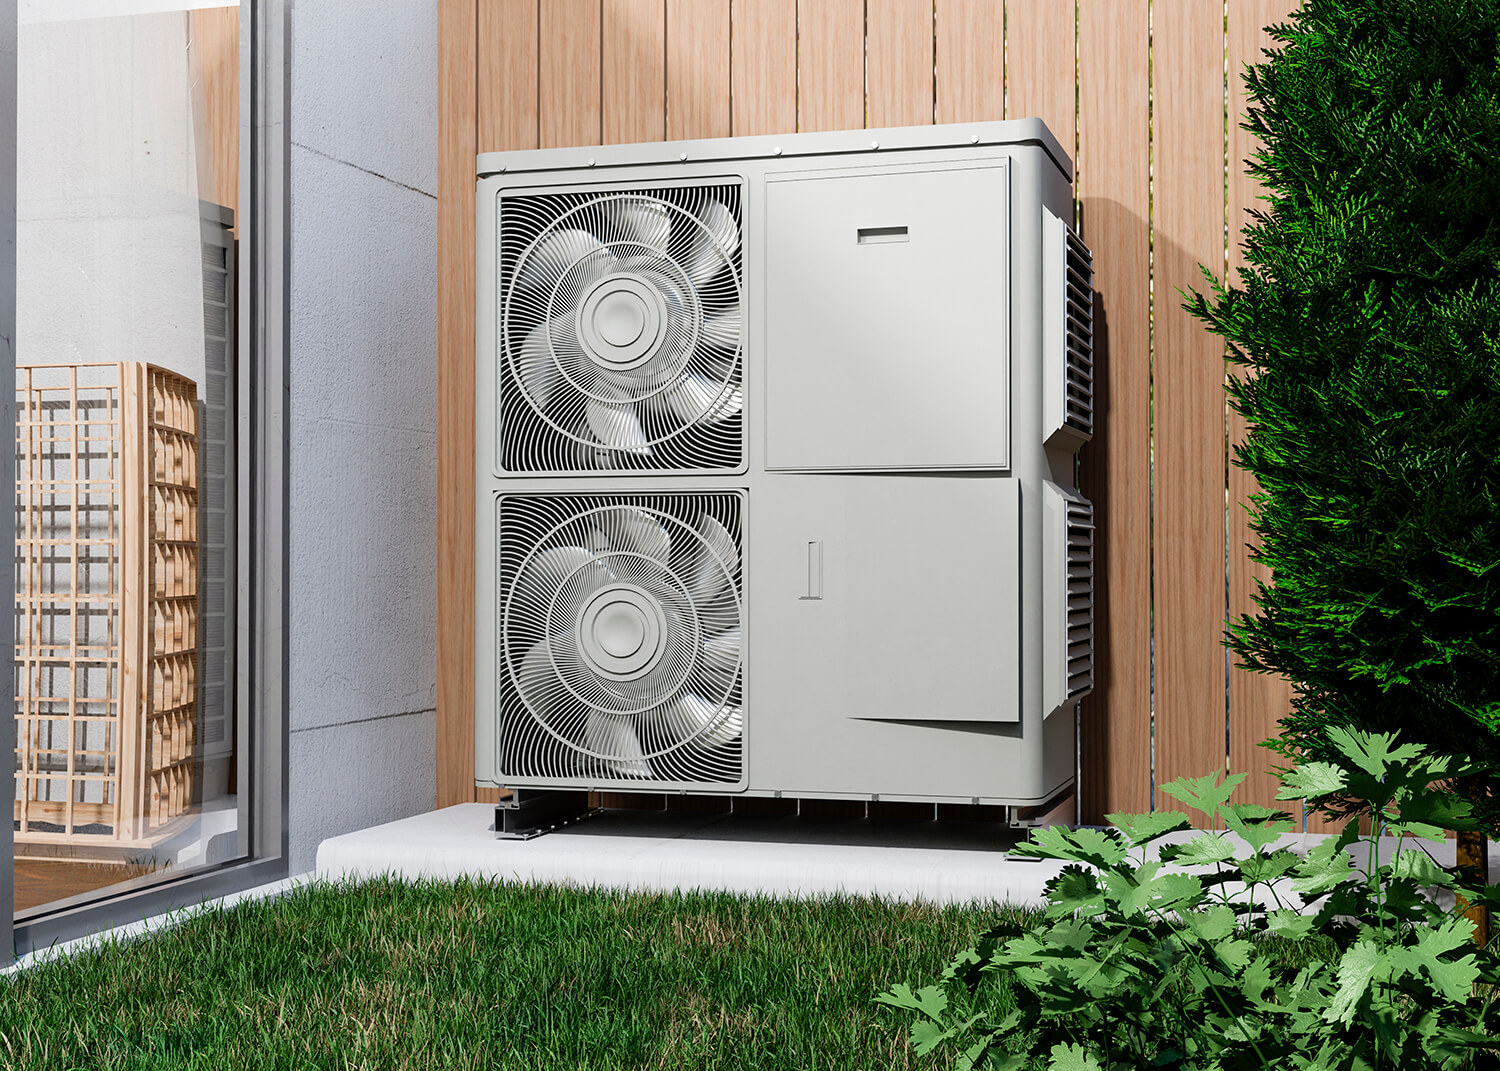 Commercial heating plus cooling providers